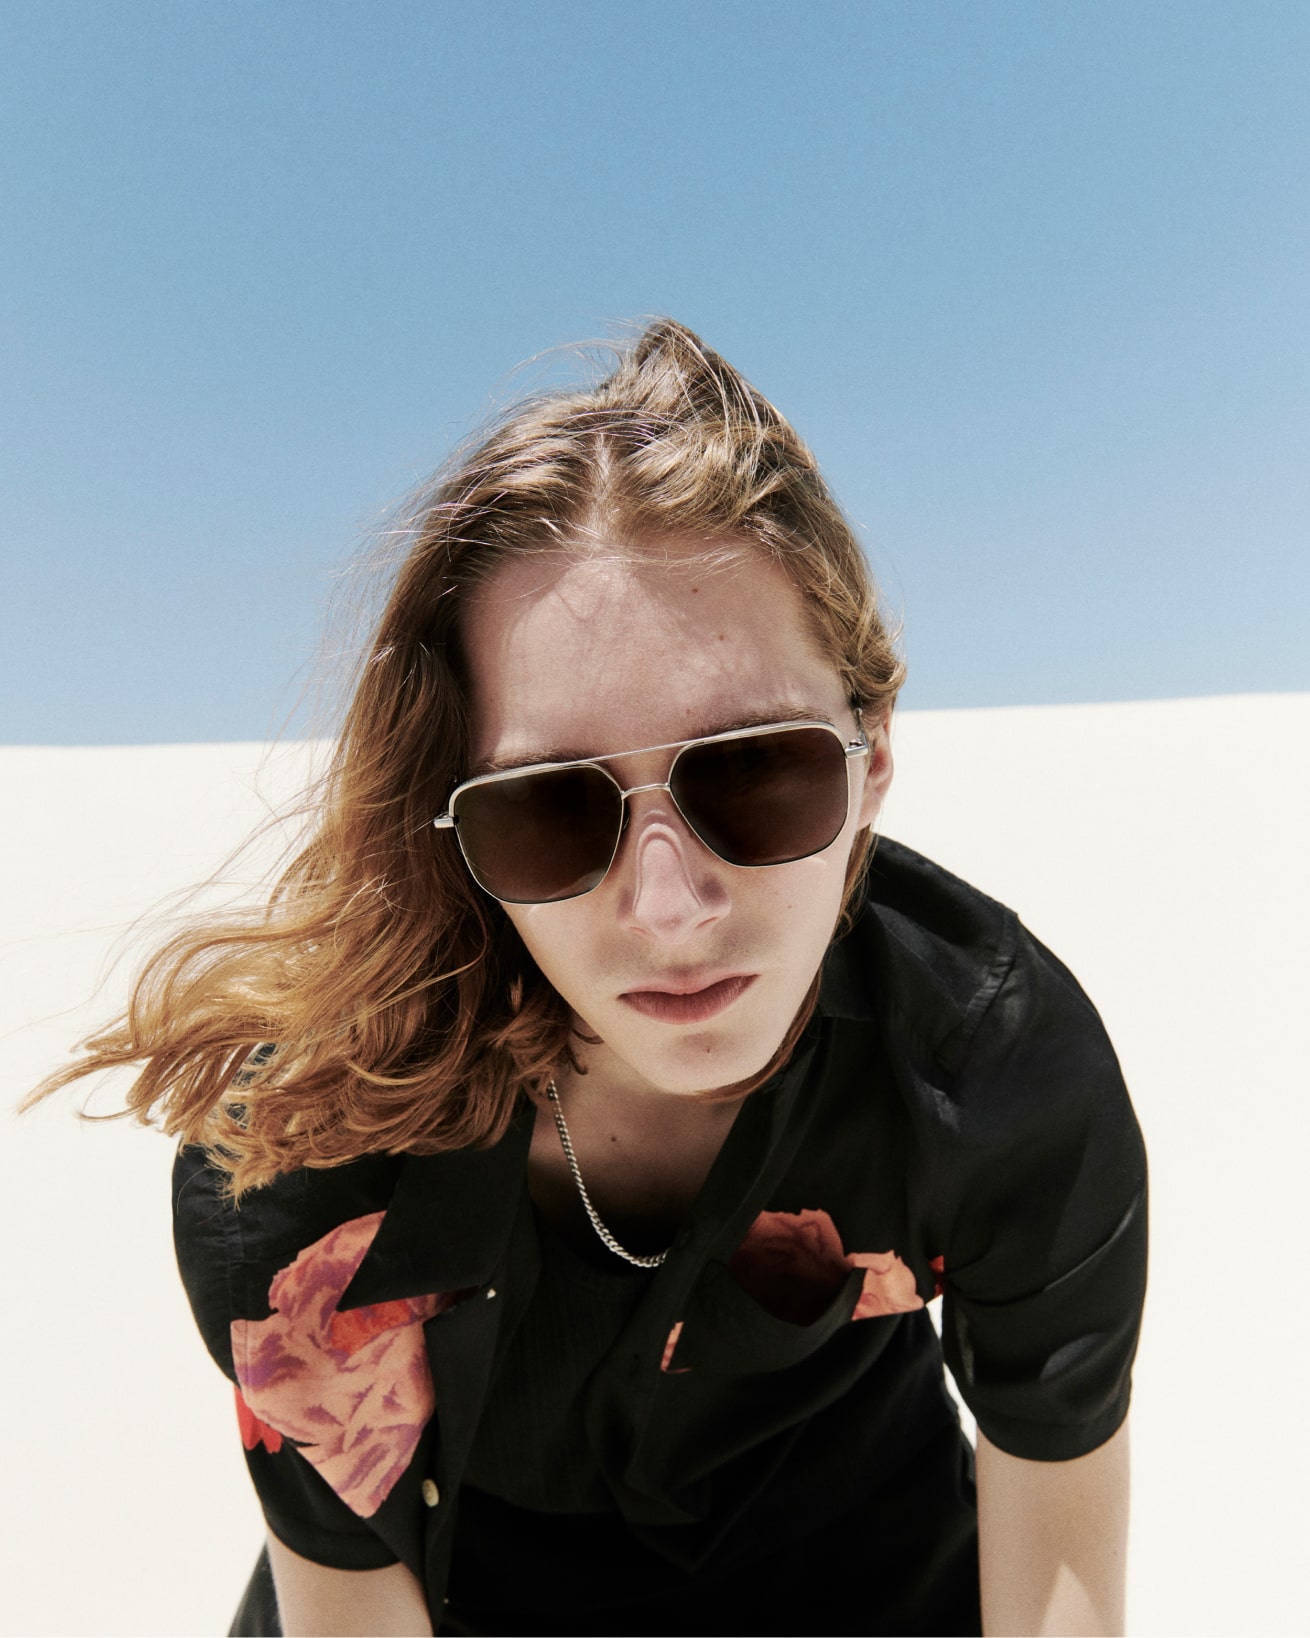 A man wearing aviator sunglasses, a chain necklace and a printed black shirt standing in front of a white dune.